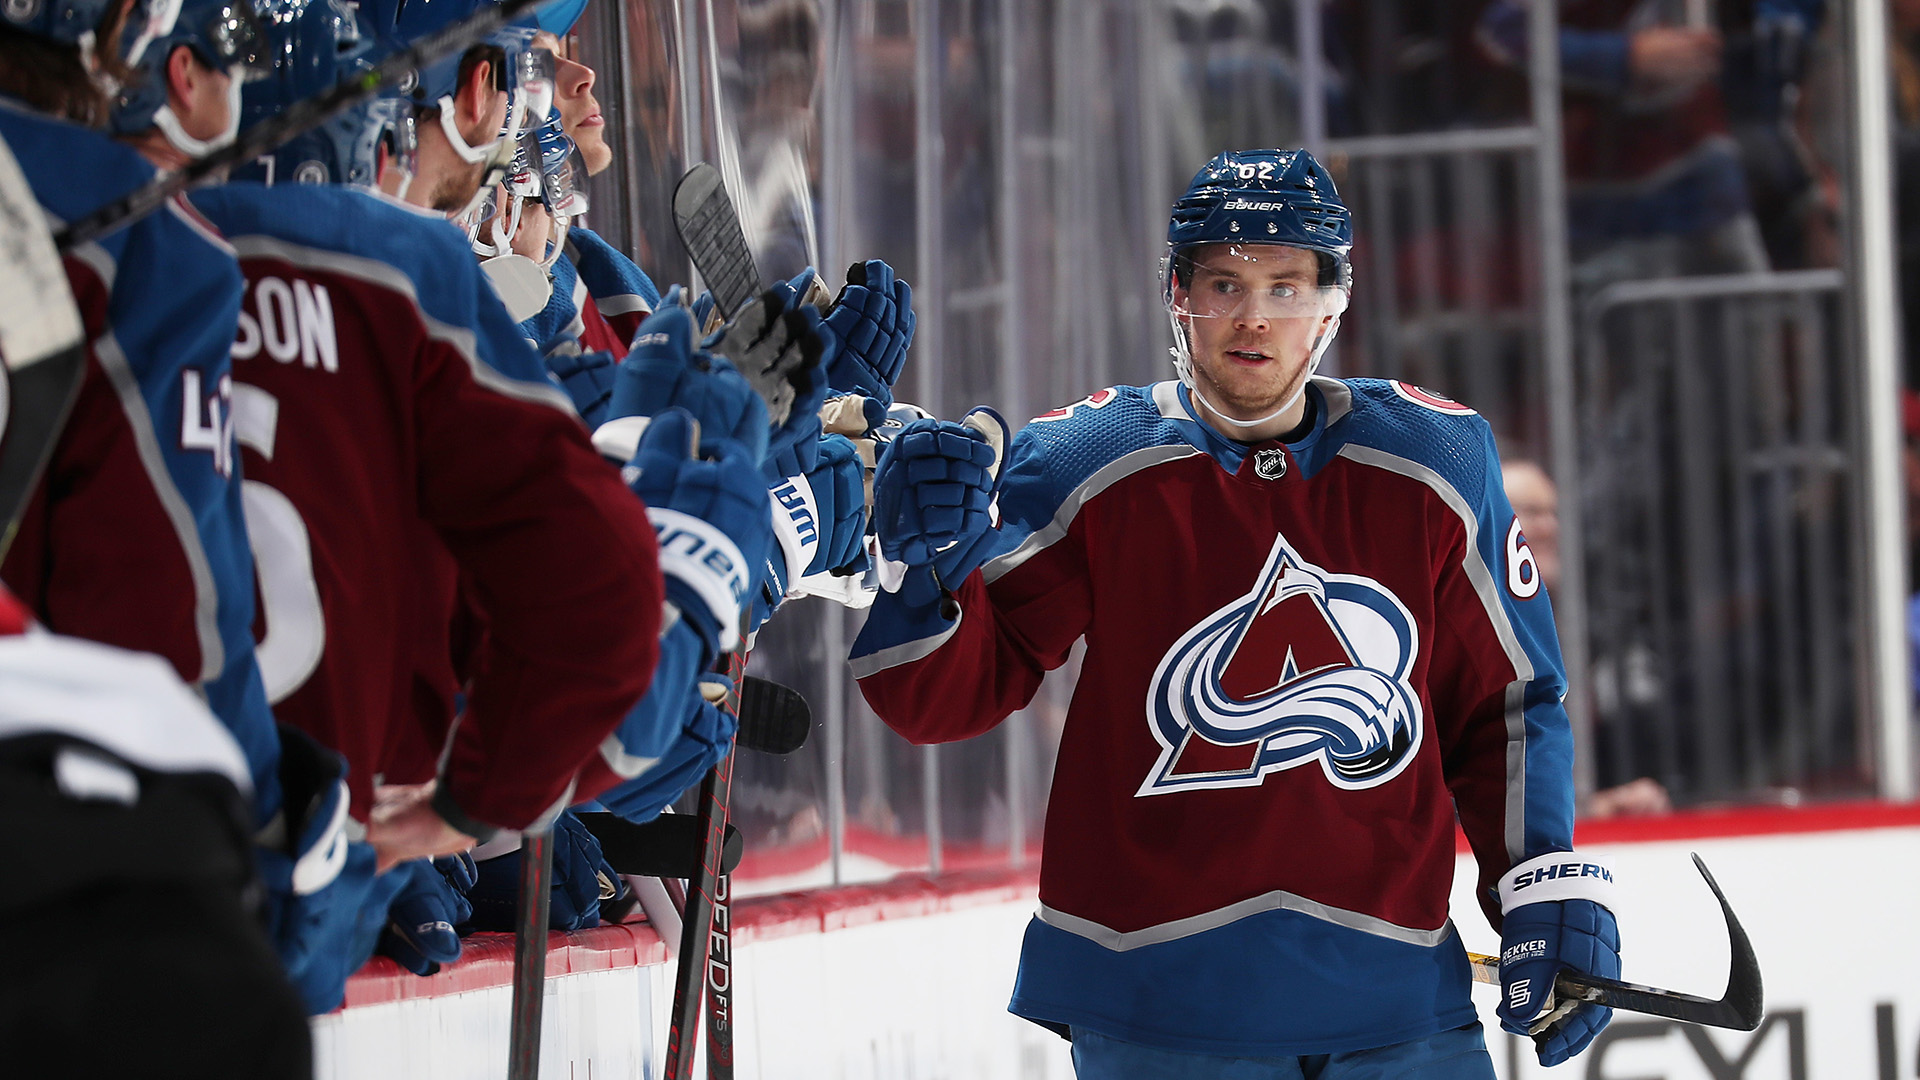 Artturi Lehkonen #62 of the Colorado Avalanche celebrates a goal against the New Jersey Devils at Ball Arena on April 14, 2022.